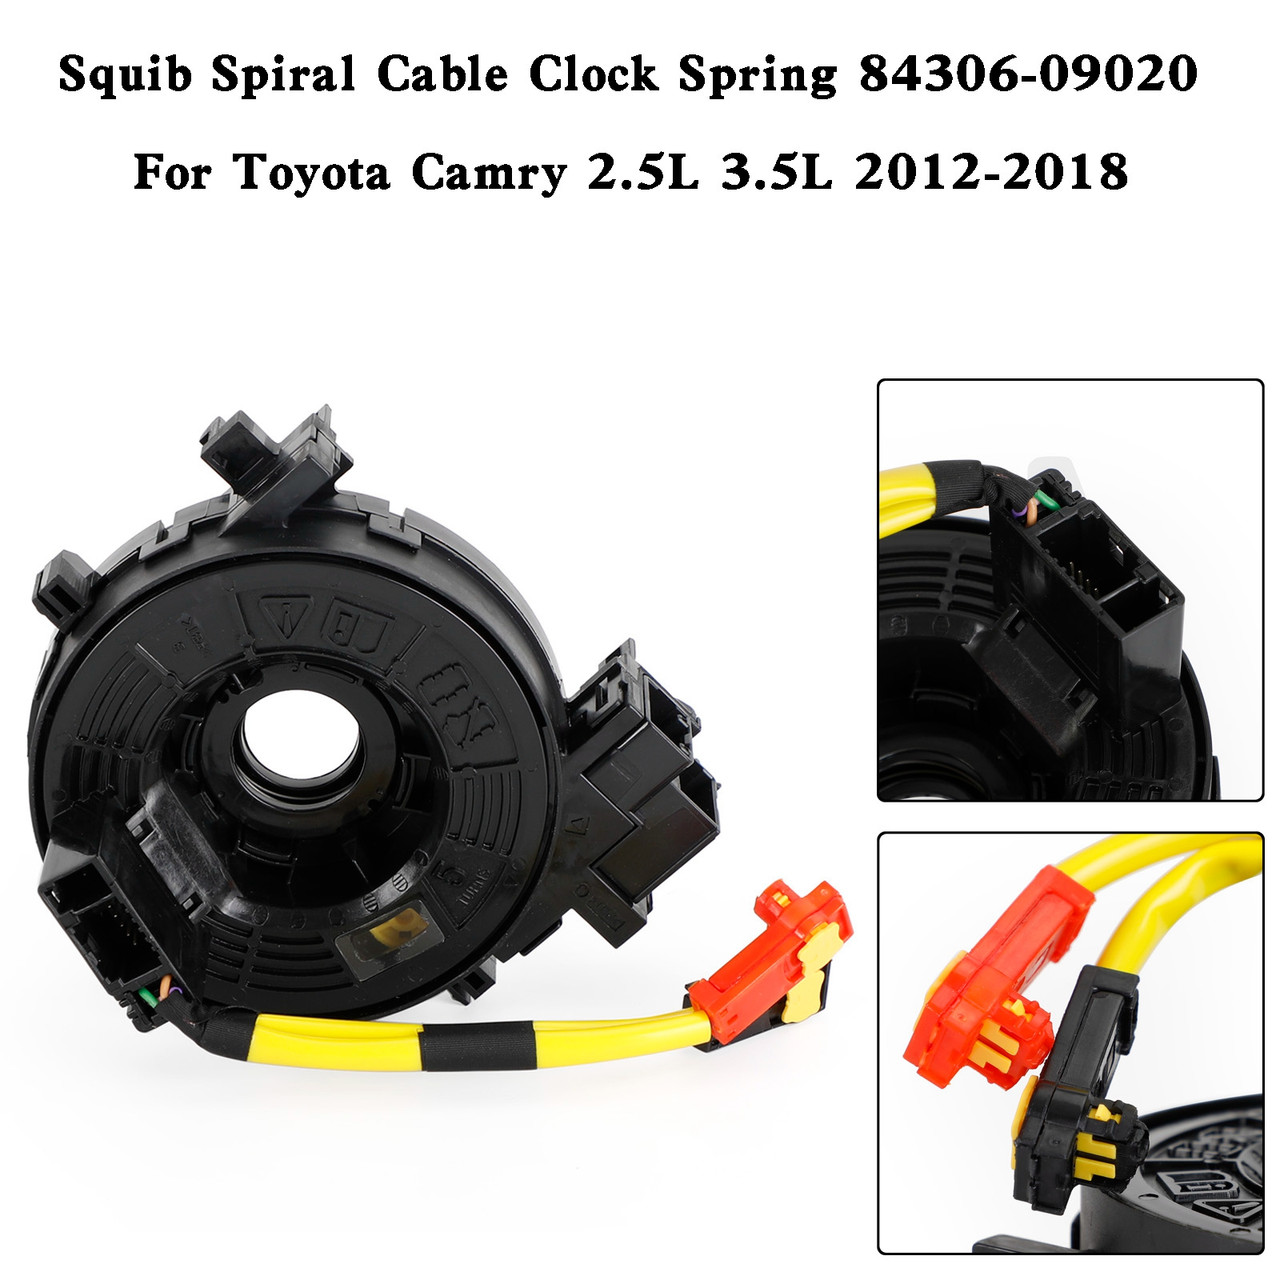 Squib Spiral Cable Clock Spring 84306-09020 For Toyota Camry 2.5L 3.5L 2012-2018